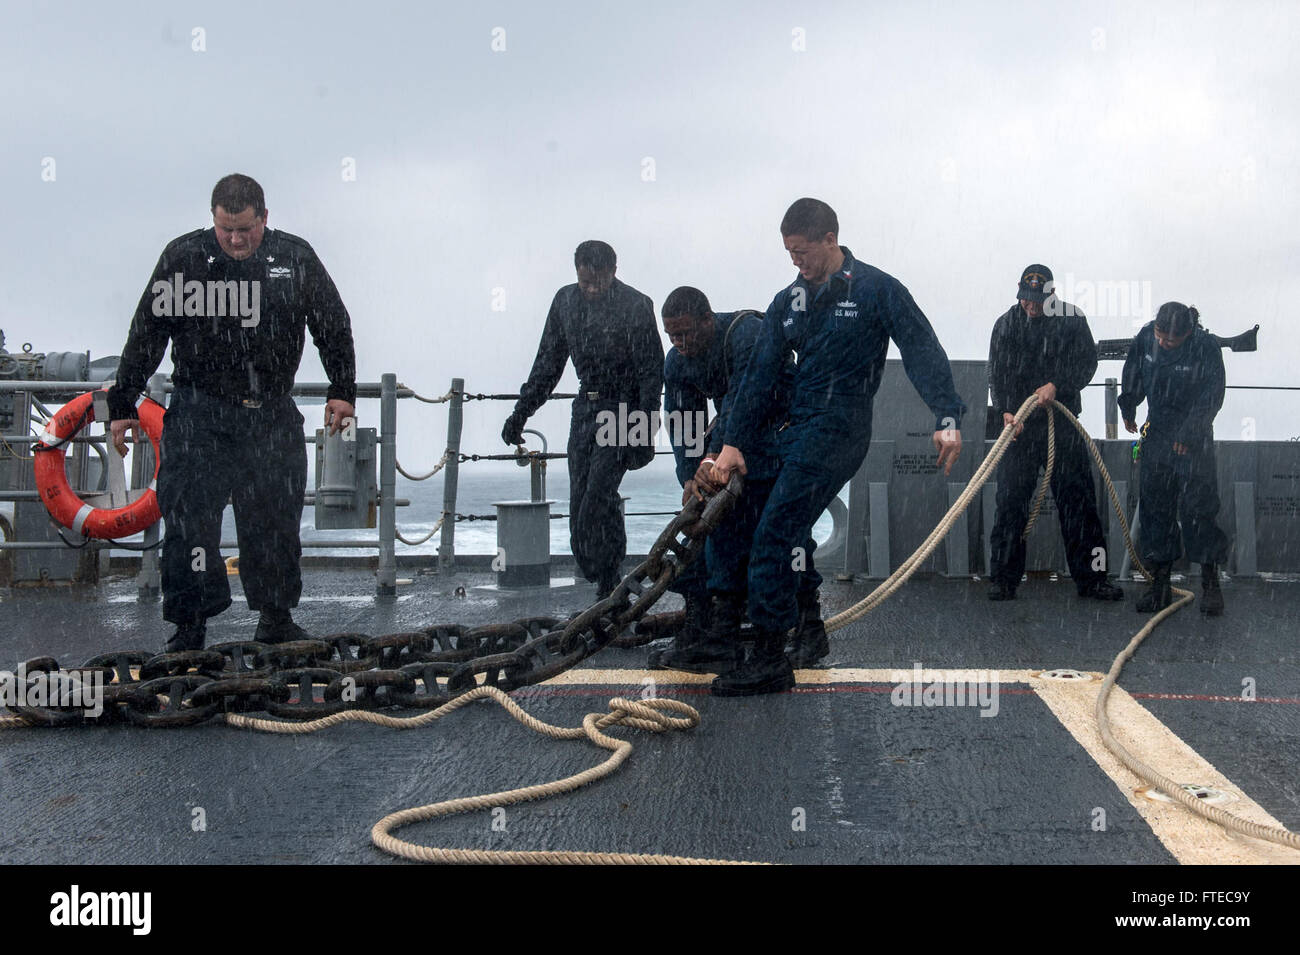 1400317-N-PJ969-241 MEDITERRANEAN SEA (March 17, 2014) Sailors heave an anchor chain across the deck of the guided-missile cruiser USS Philippine Sea (CG 58). Philippine Sea is on a scheduled deployment supporting maritime security operations and theater security cooperation efforts in the U.S. 6th Fleet area of operations. (U.S. Navy photo by Mass Communication Specialist 3rd Class Abe McNatt/Released) Stock Photo